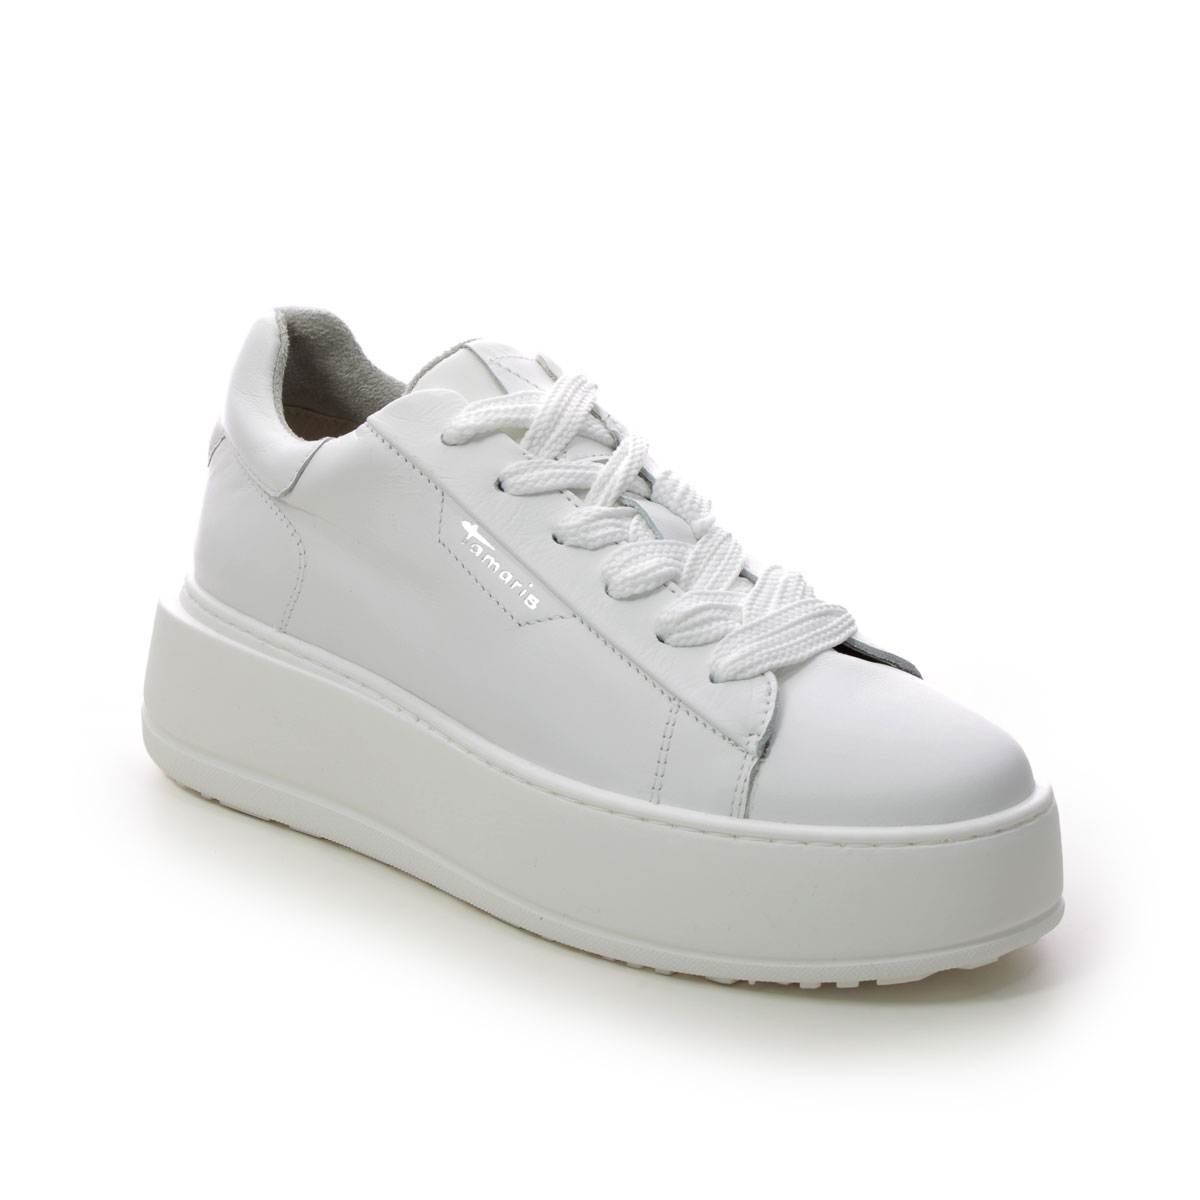 Tamaris Platform 50 White Leather Womens Trainers 23812-20-117 In Size 41 In Plain White Leather